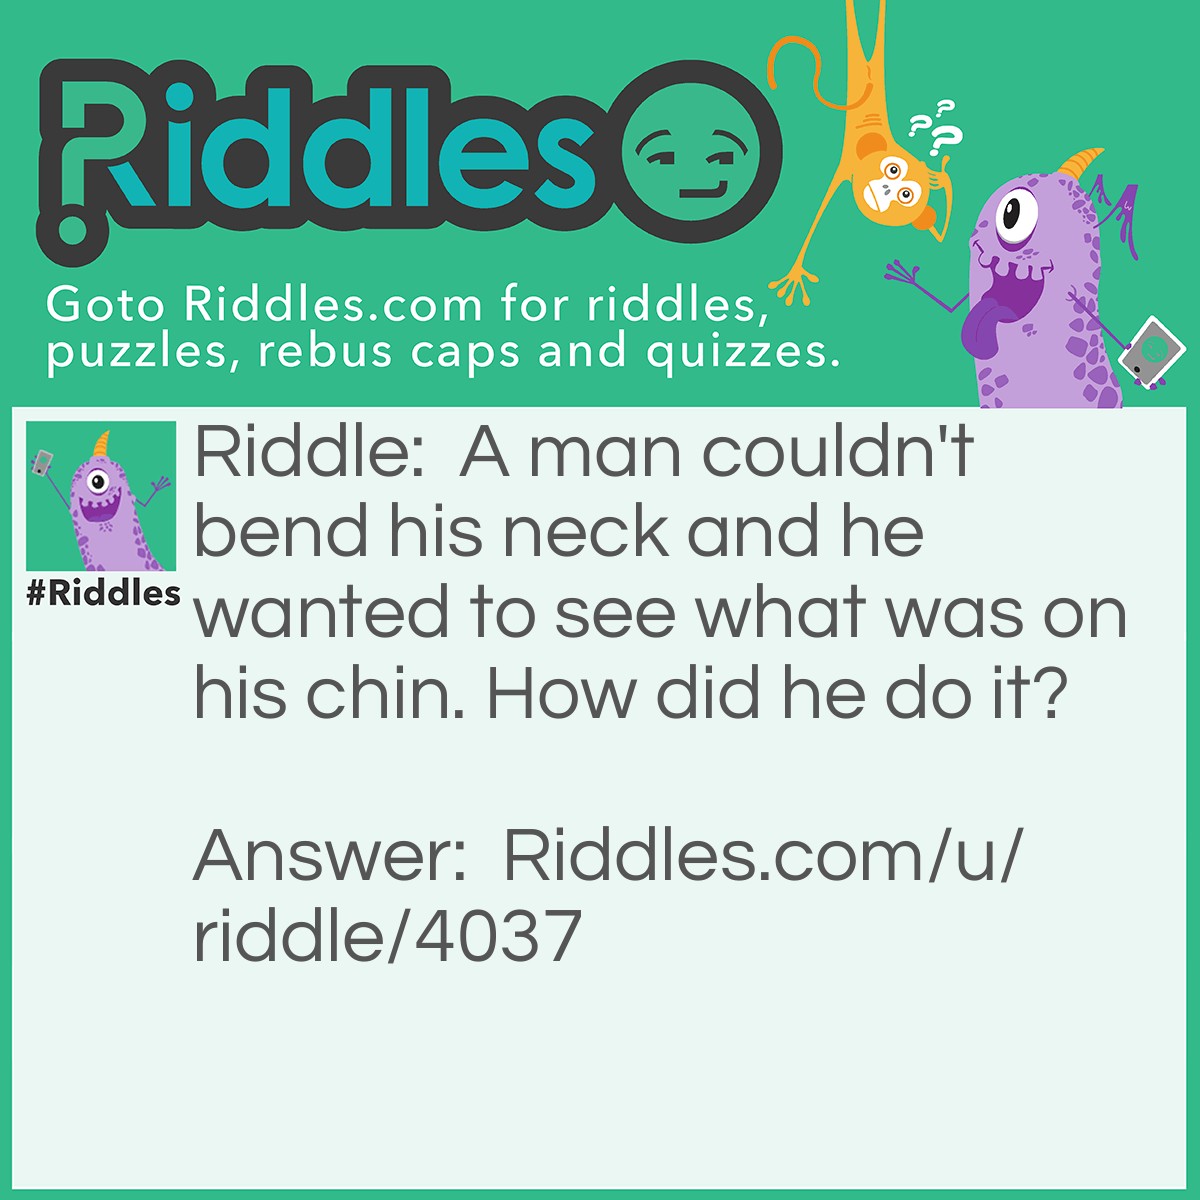 Riddle: A man couldn't bend his neck and he wanted to see what was on his chin. How did he do it? Answer: He had a mirror on the floor and on the roof slightly tilted.